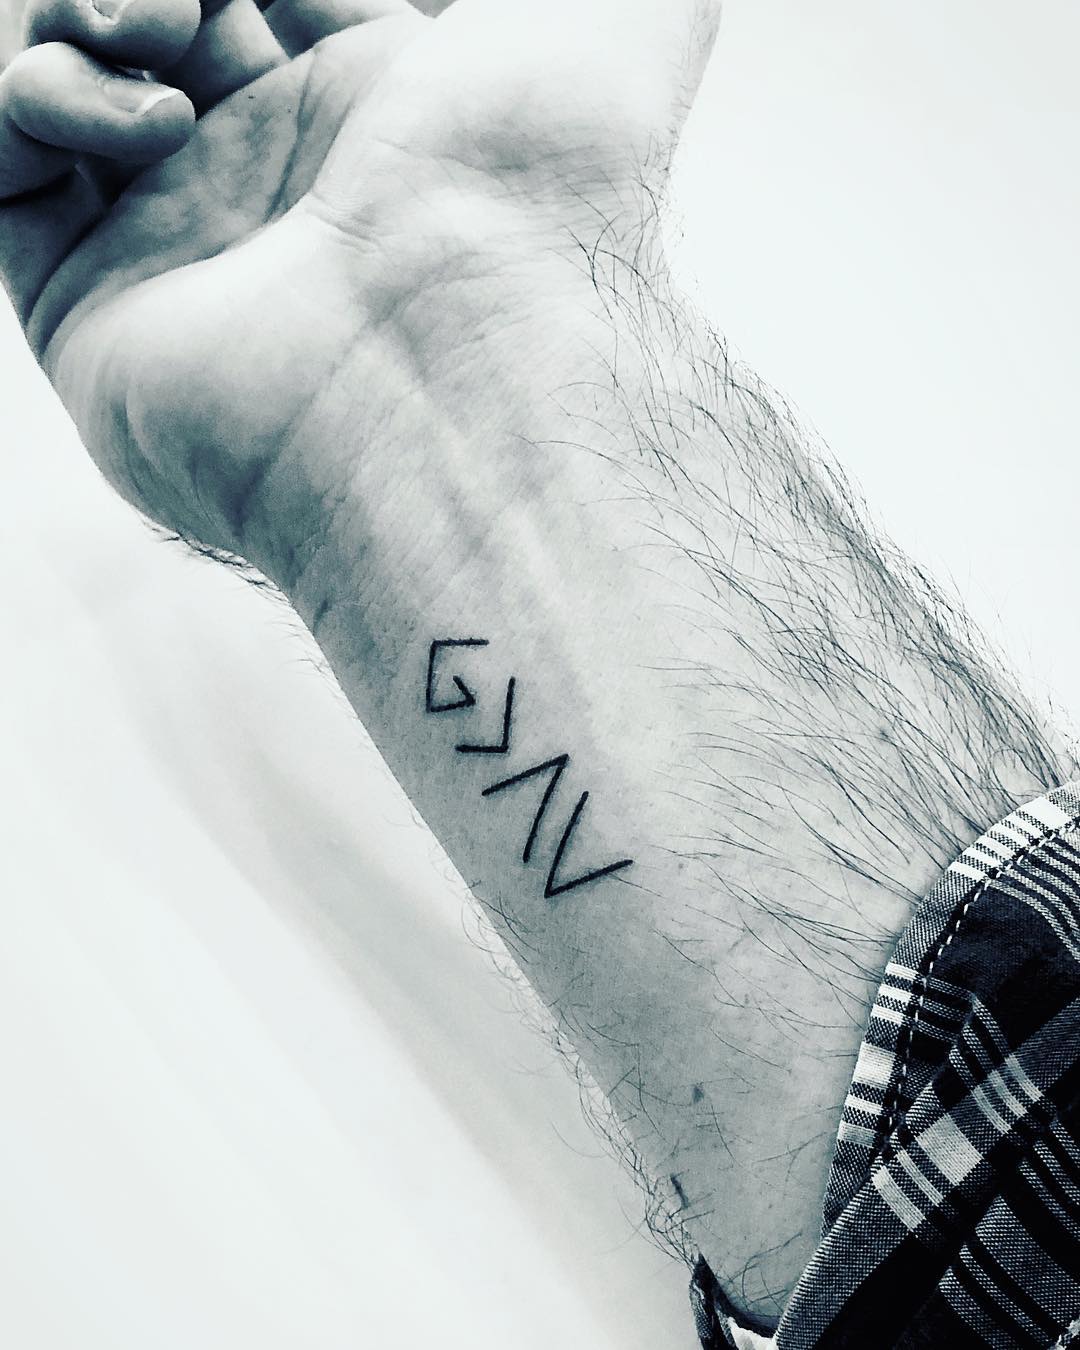 God is greater than the highs and lows.